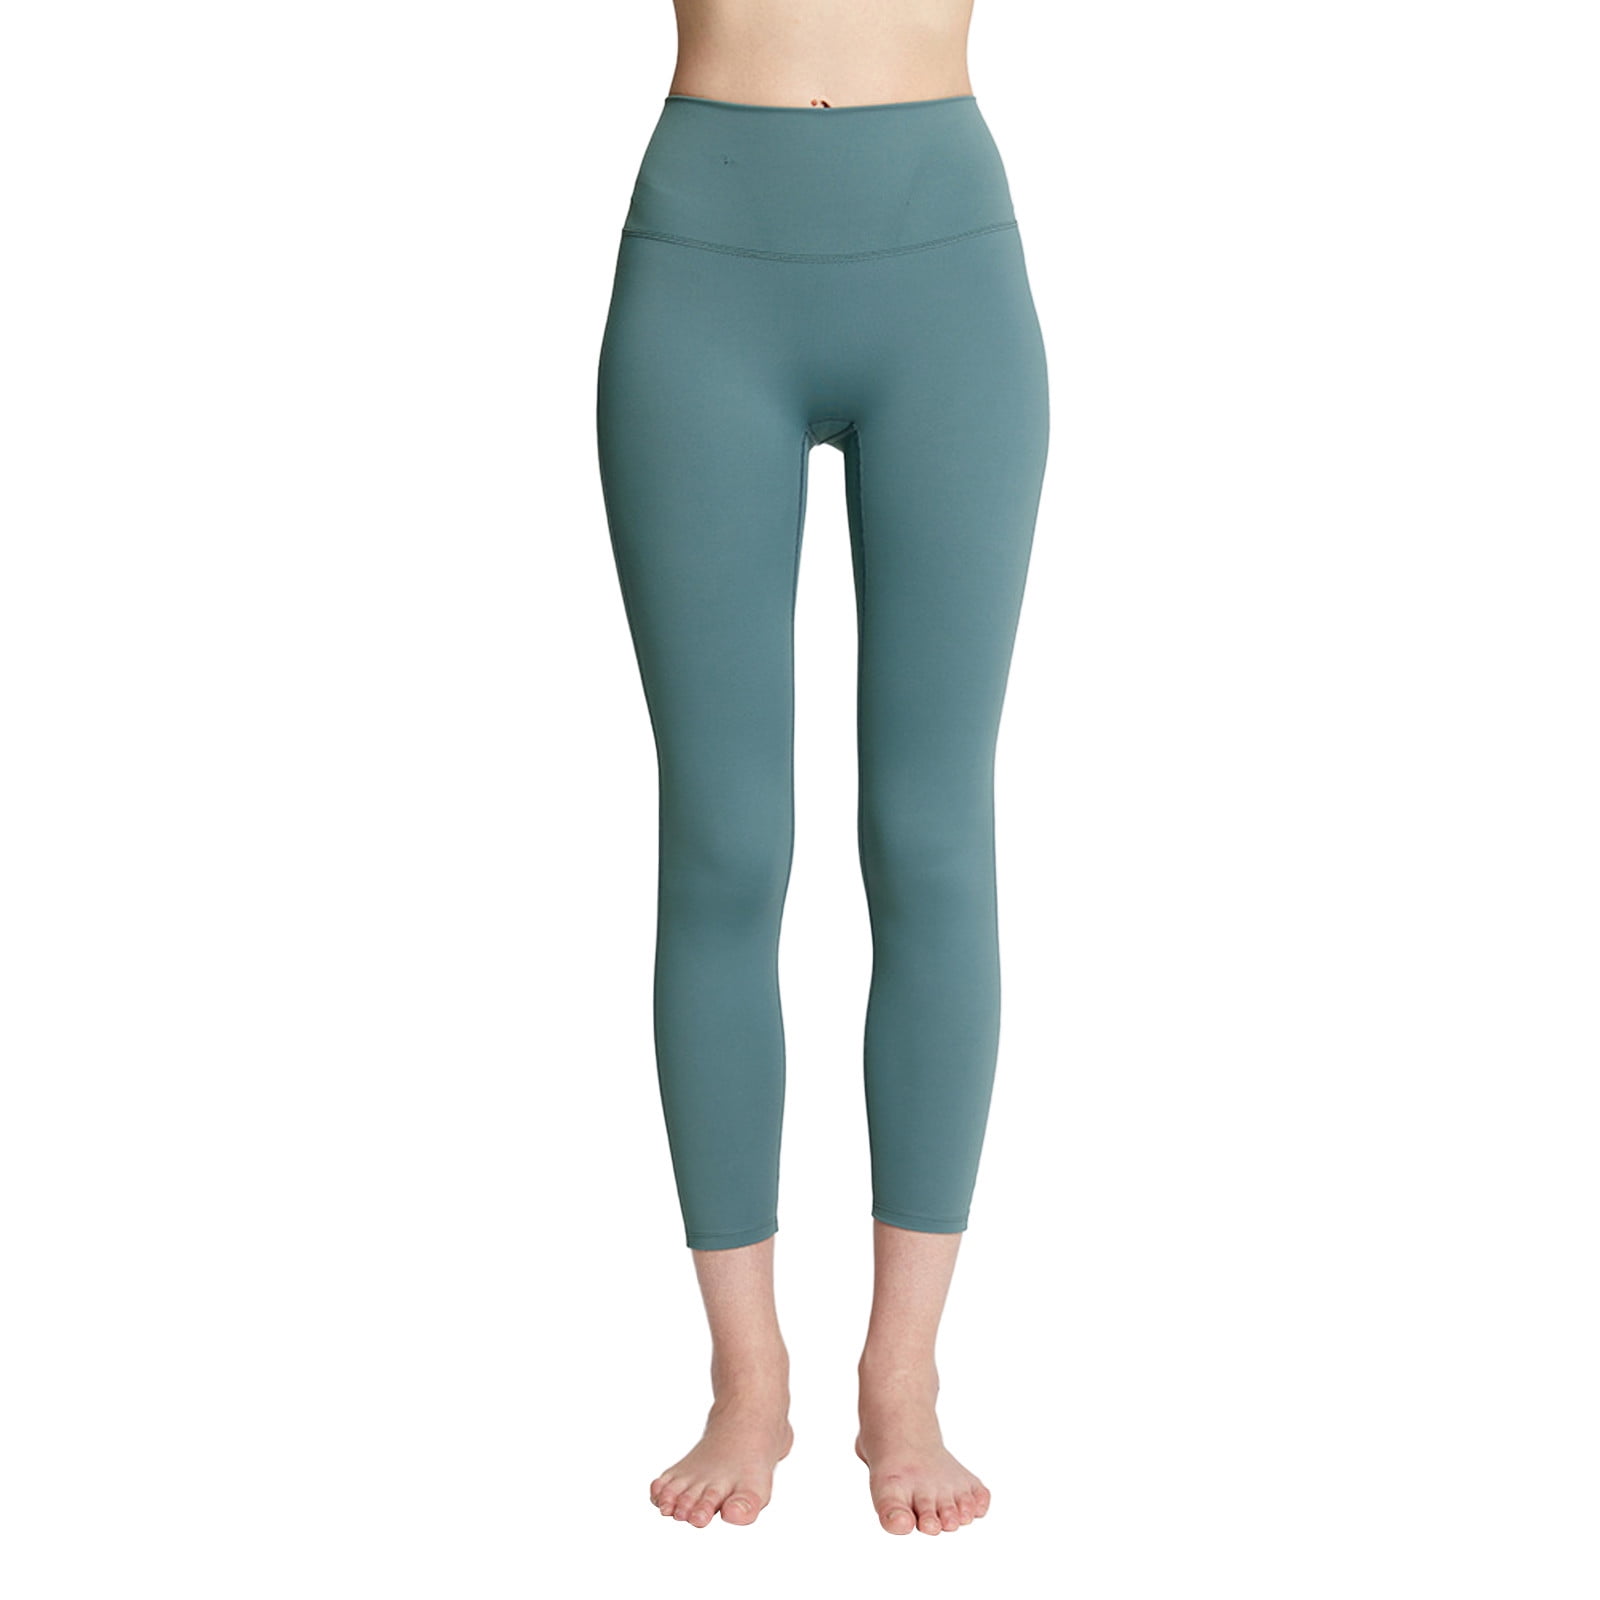 Up To 80% Off On LESIES Women's Full-Length Groupon Goods, 60% OFF